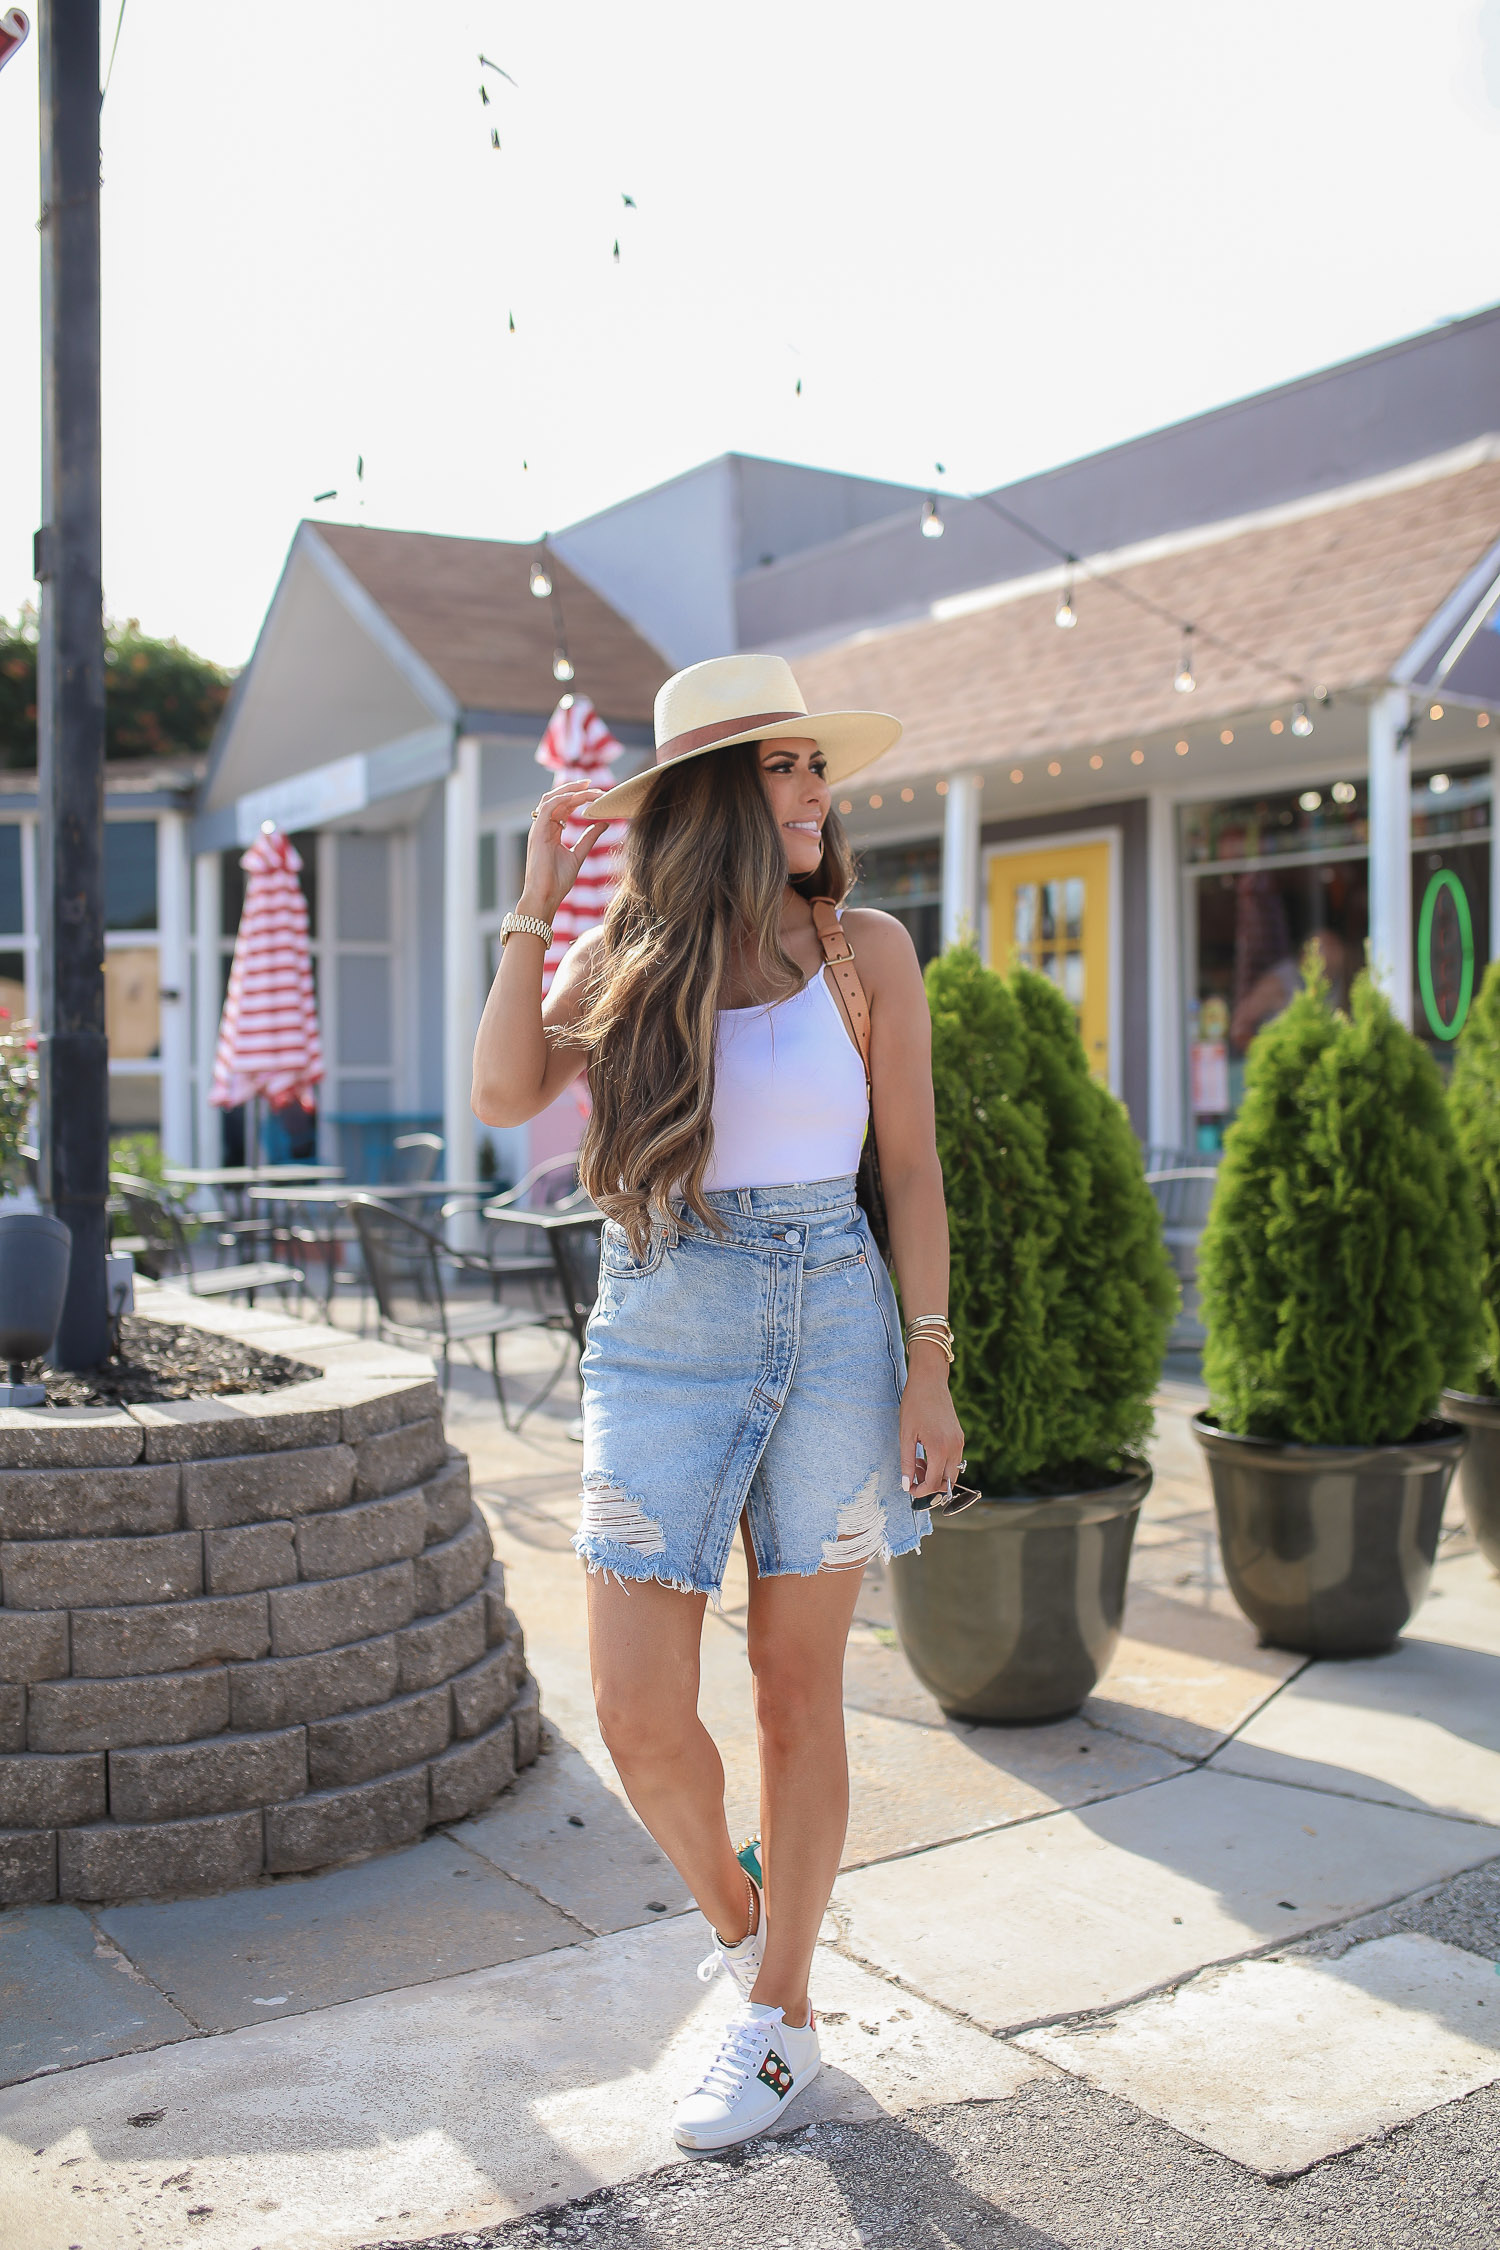 Free People parker wrap denim mini skirt, gucci womens new ace sneaker, rag & bone straw hat, emily ann gemma, summer fashion pinterest 2020, tulsa fashion blogger-2 | Instagram Recap by popular US life an style blog, The Sweetest Thing: image of Emily Gemma standing outside and wearing a Free People parker wrap denim mini skirt, gucci womens new ace sneaker, and rag & bone straw hat.